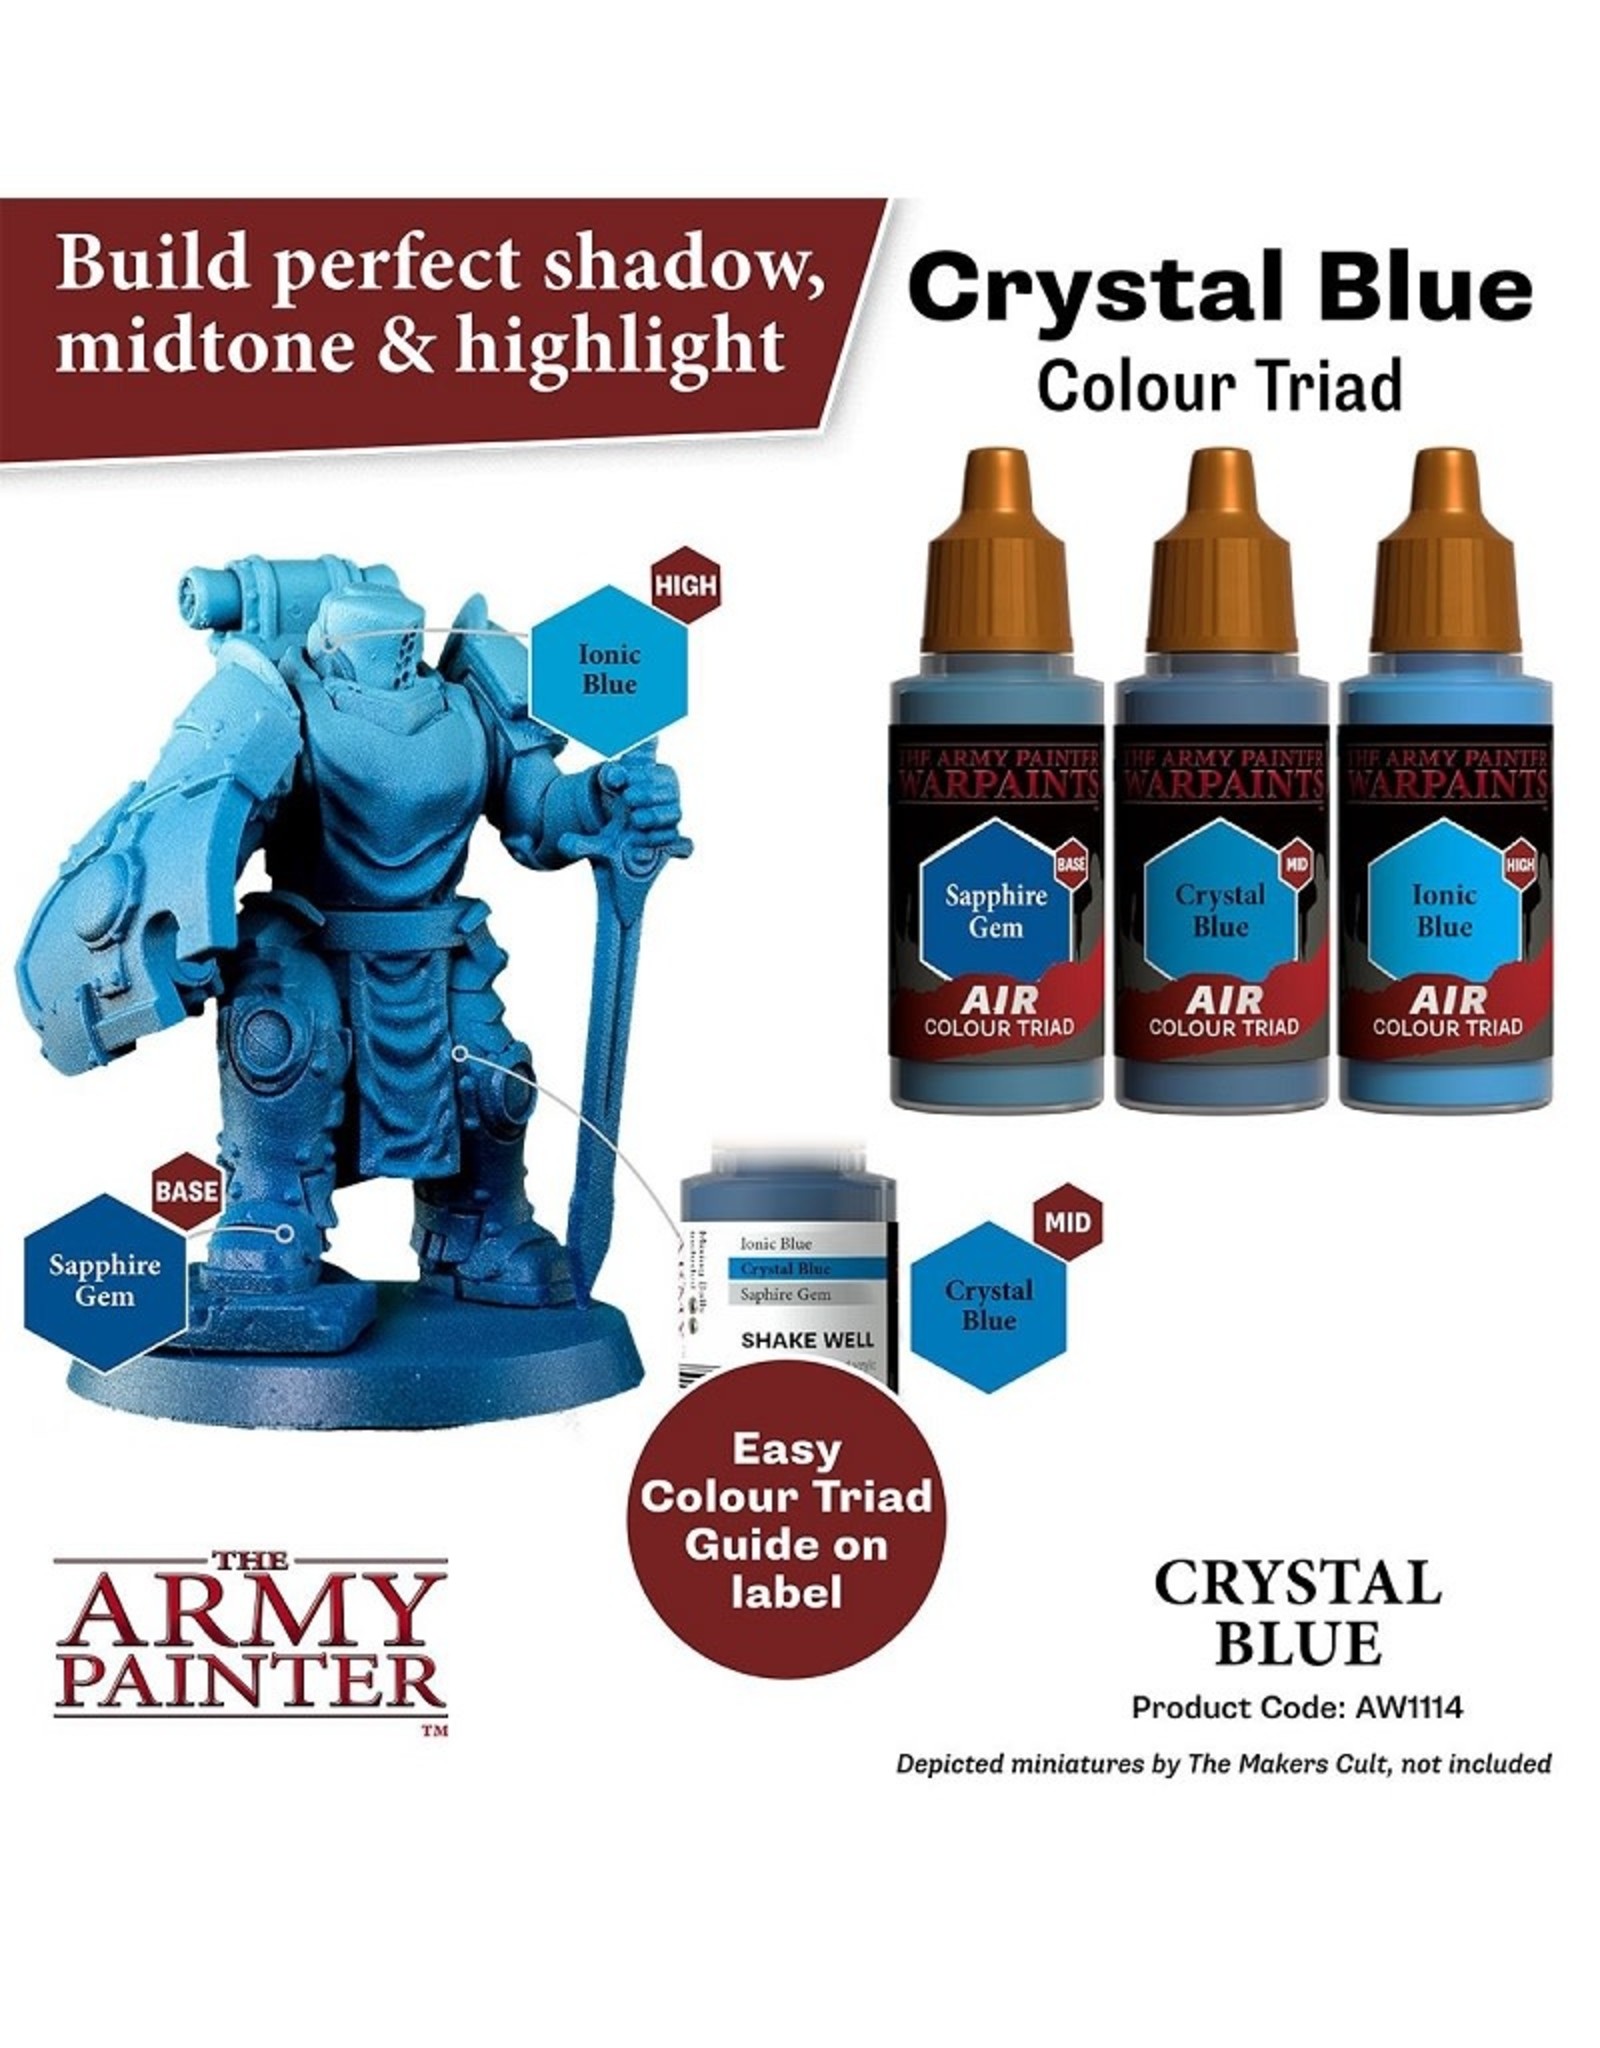 The Army Painter Warpaint Air: Crystal Blue (18ml)